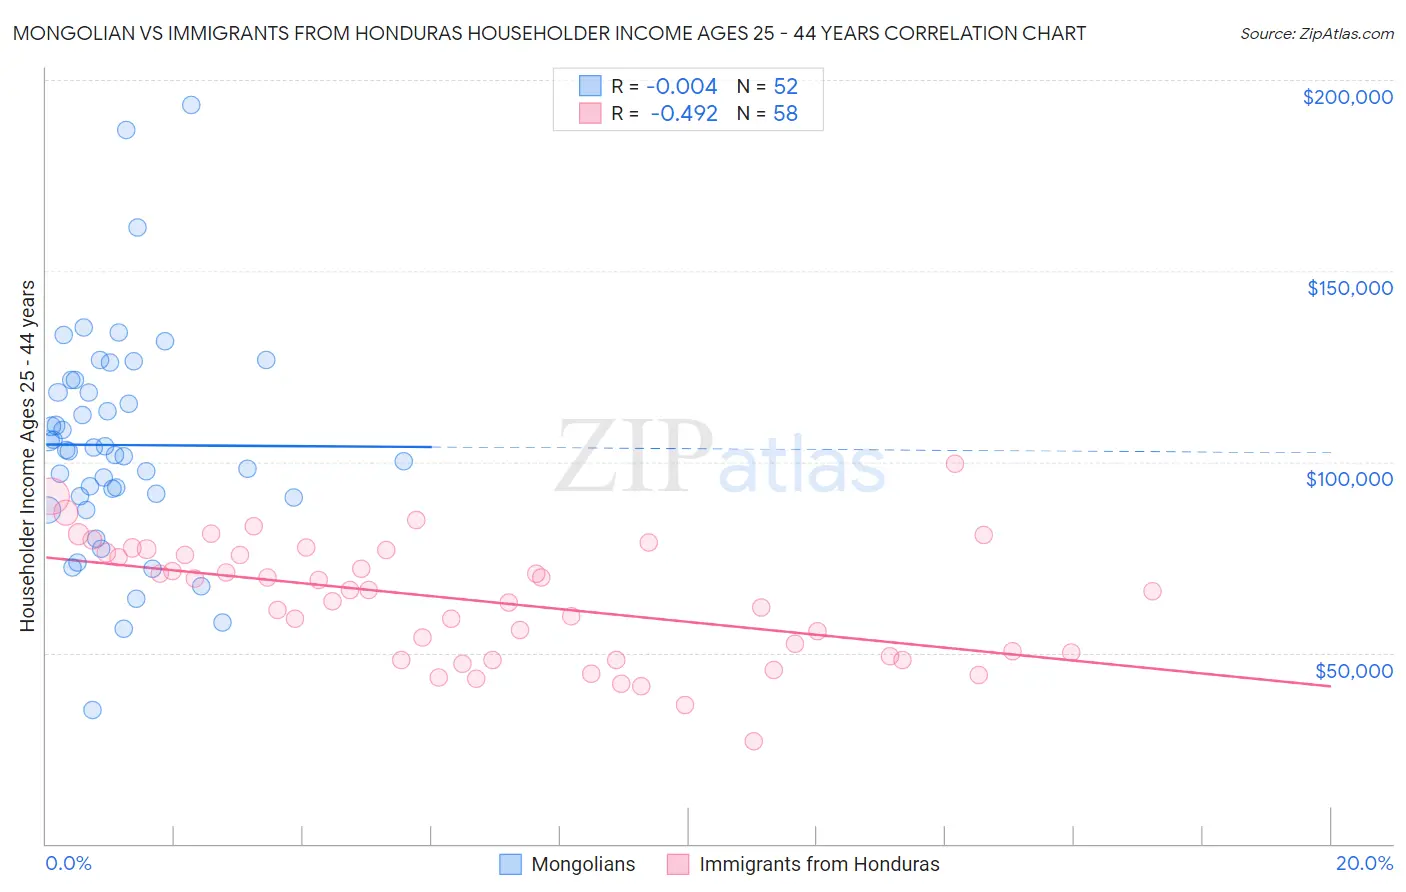 Mongolian vs Immigrants from Honduras Householder Income Ages 25 - 44 years